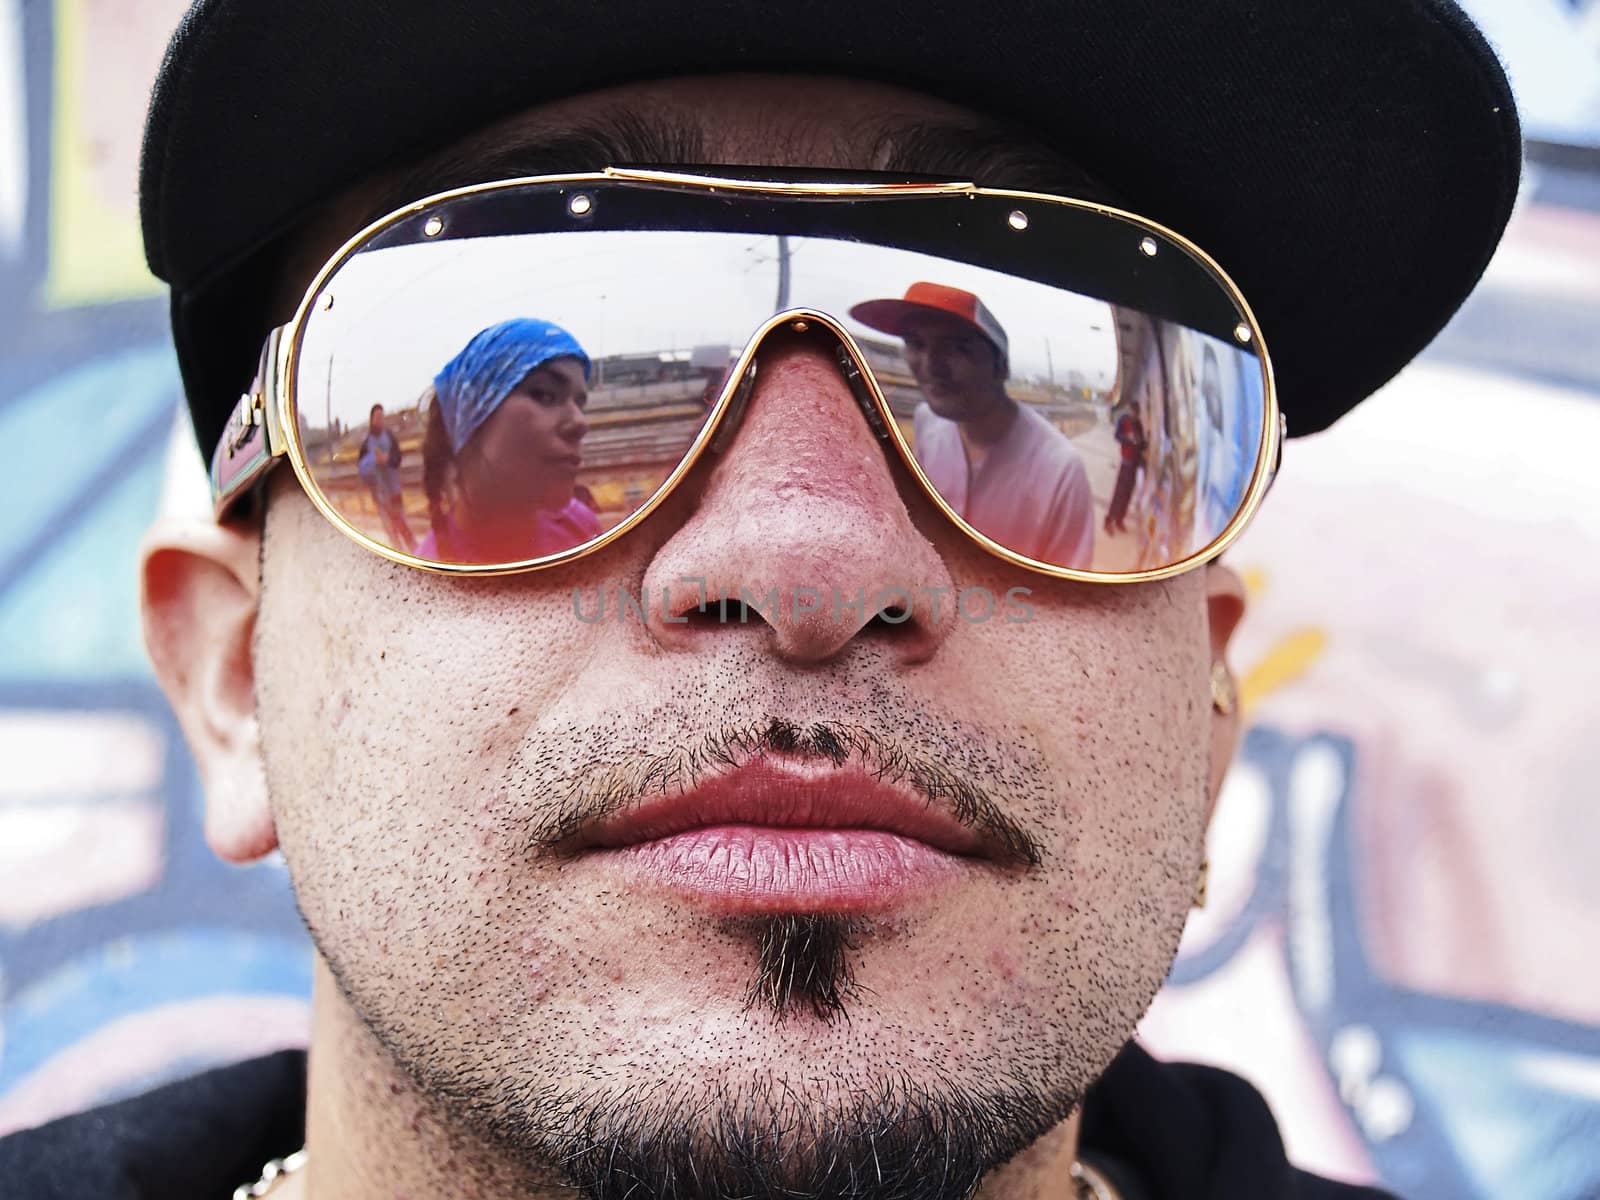 Portrait of three rappers, two of them reflected on the sunglasses of the other